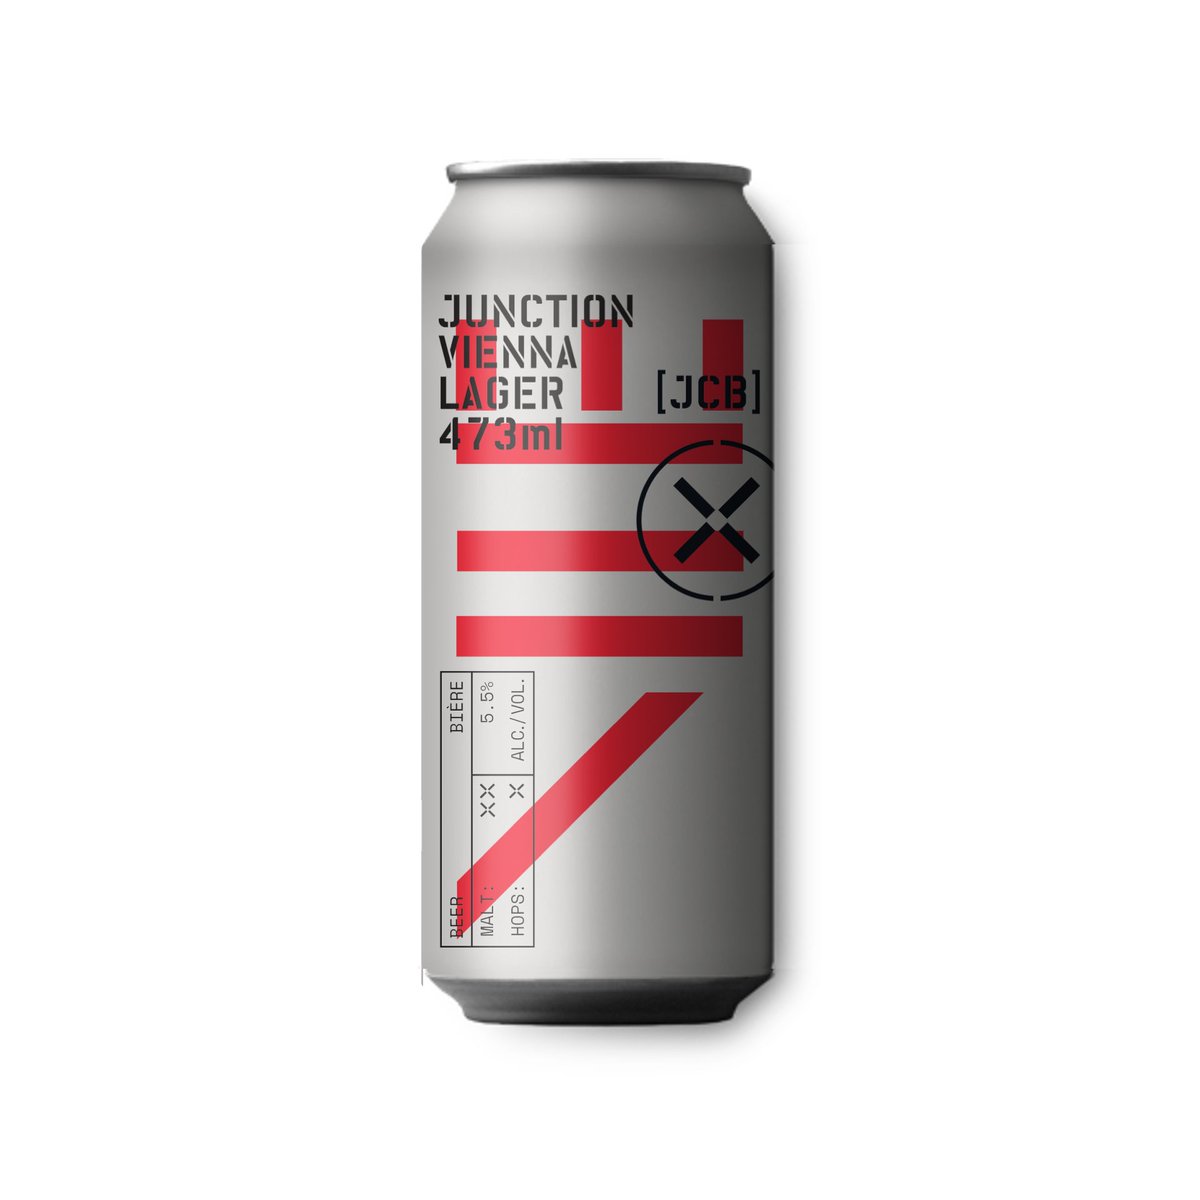 New Beer Release - Vienna Lager 

Vienna style lager with lots of toasty malt character, well hopped with floral old world hops 

ABV 5.5% IBU 22

Available to online order for delivery or pick up

#wewantbeer #viennalager #craftbeer #torontocraftbeer